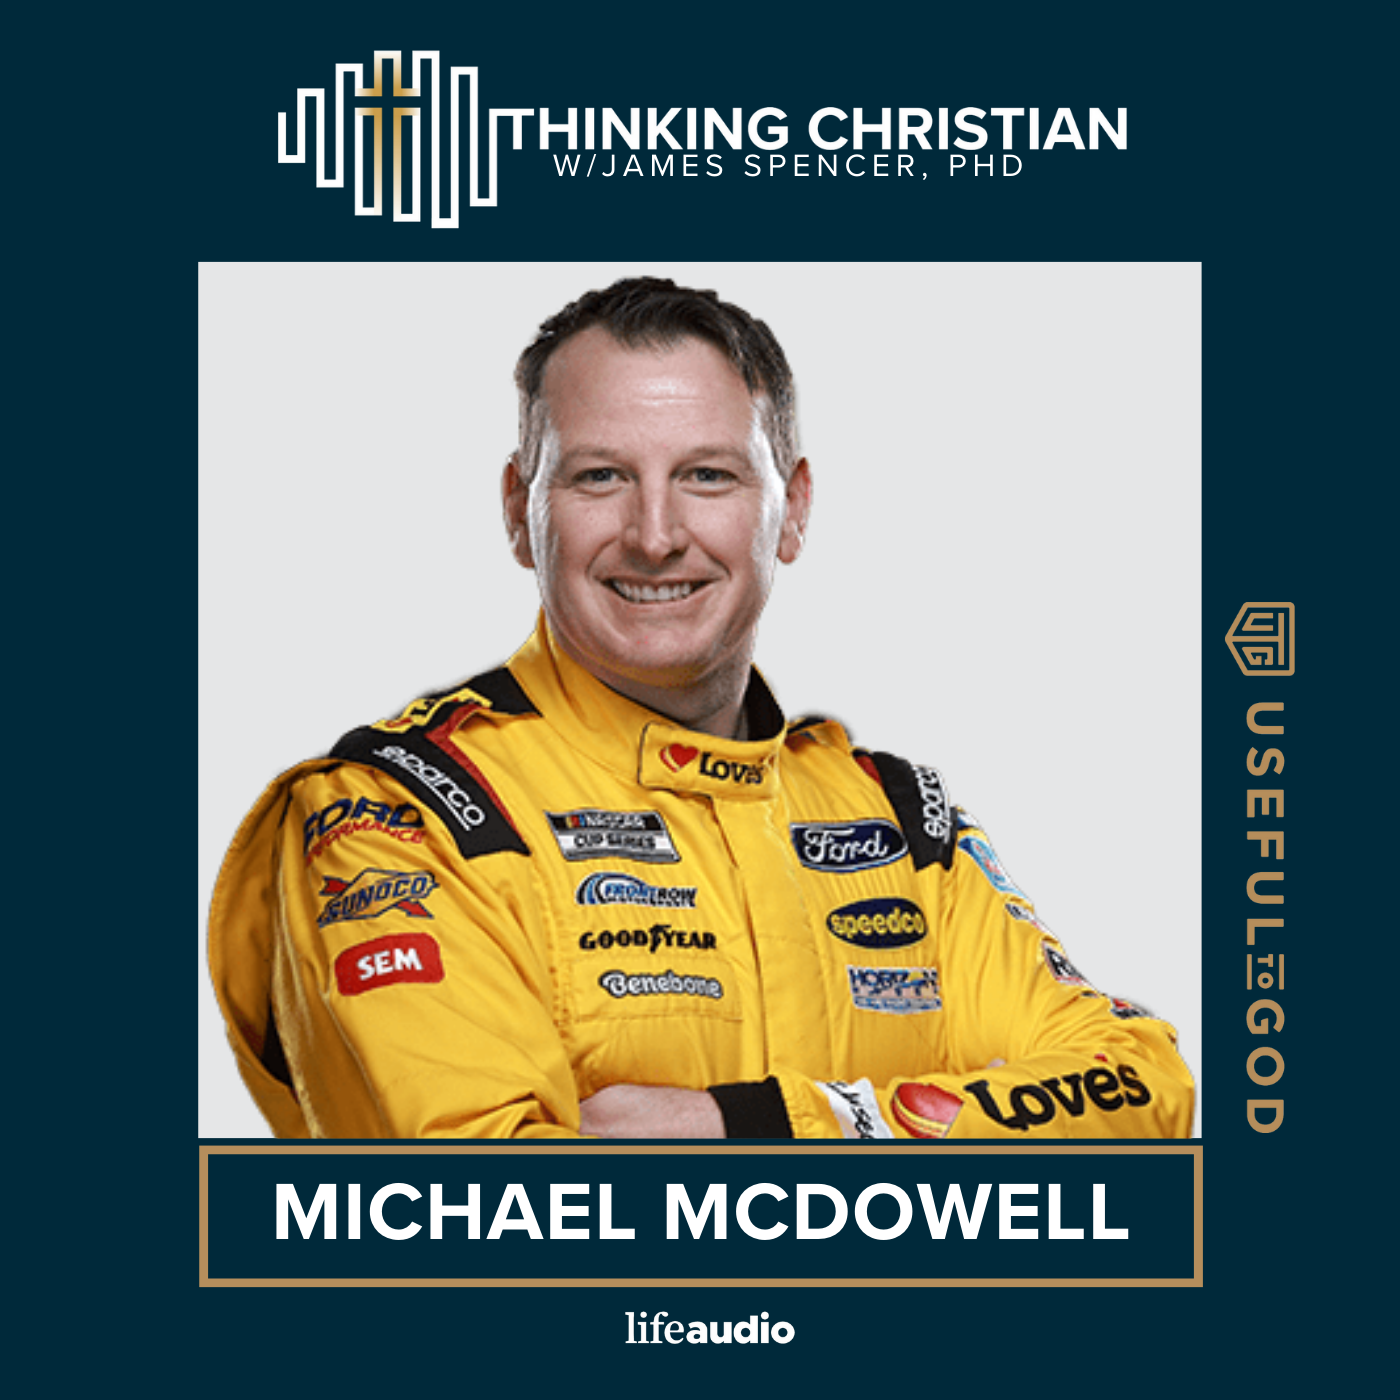 Thinking Christian at NASCAR with Michael McDowell